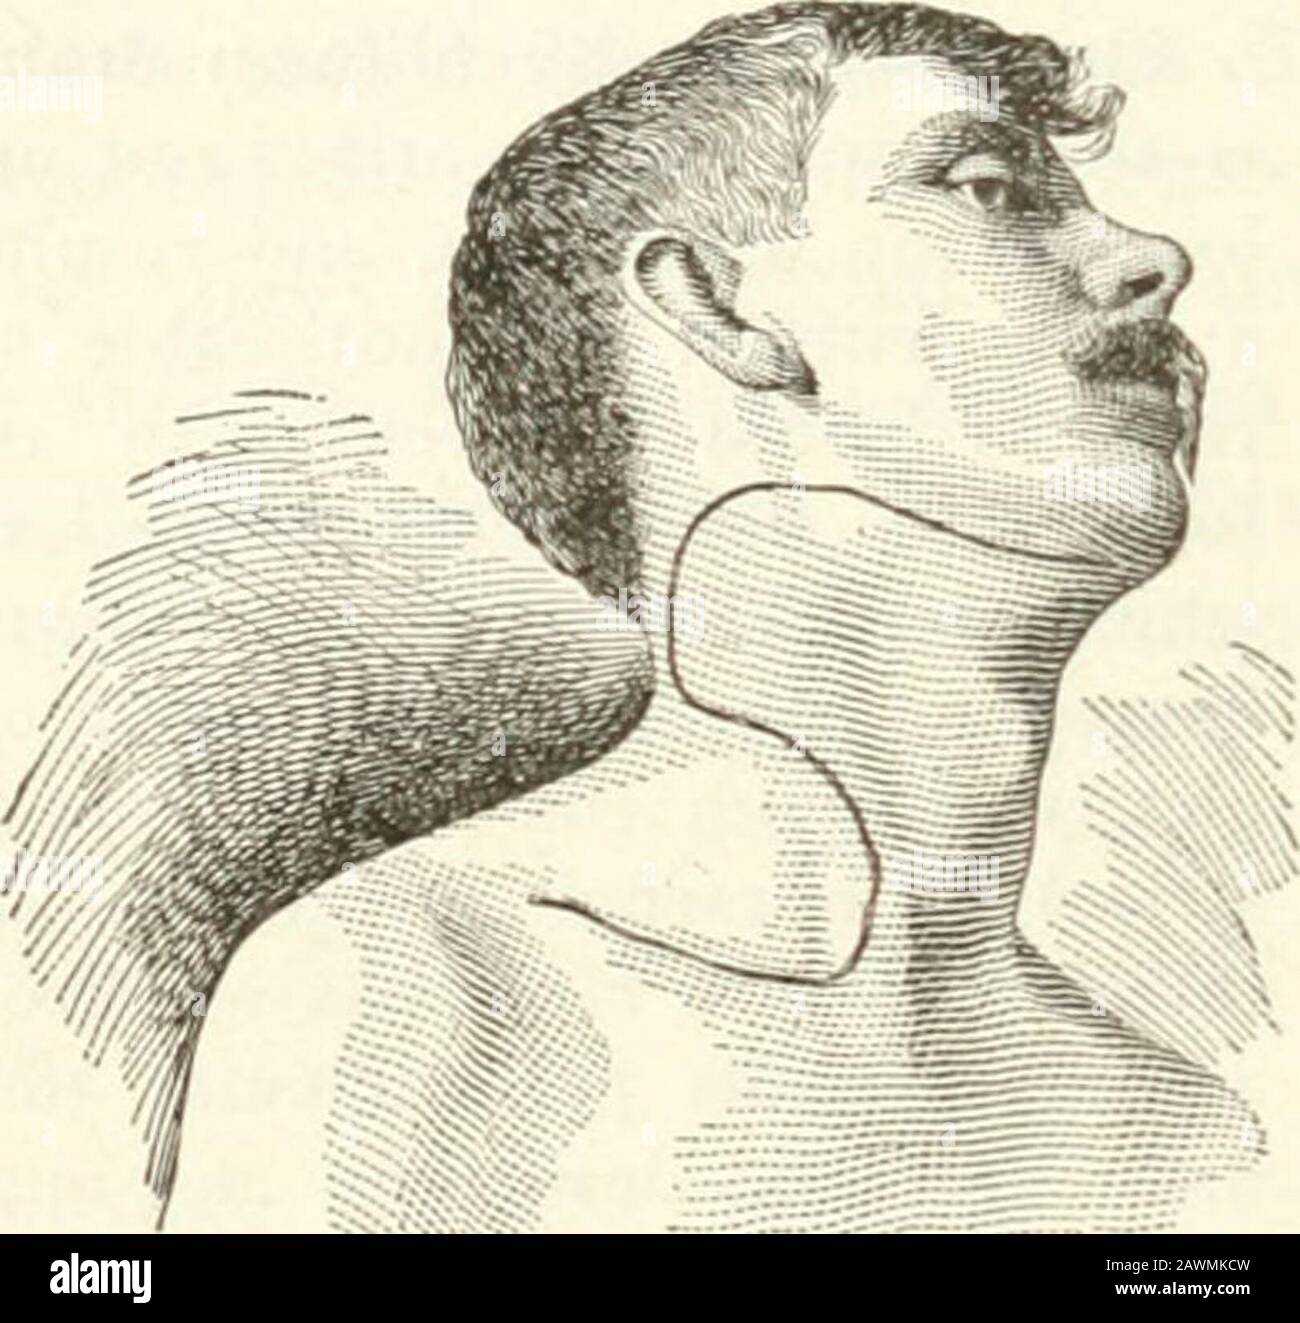 Sajous's analytical cyclopædia of practical medicine . nflamed it can bekept from ulcerating by insertingcrucial horsehair strands through theabscess from the sound skin; if per-foration of the skin does take placeit soon closes under a dry zinc per-oxide dressing. Chaput (Paris med.,Apr. 22, 1916). Rapid and complete healing is al-ways realized in the writers casesafter excision of tuberculous glandsin the neck, owing to his routine pro-cedure of suturing immediately with-out draining. In more than half ofhis 63 cases the gland burst and pusinundated the field, but his assump-tion that the pu Stock Photo